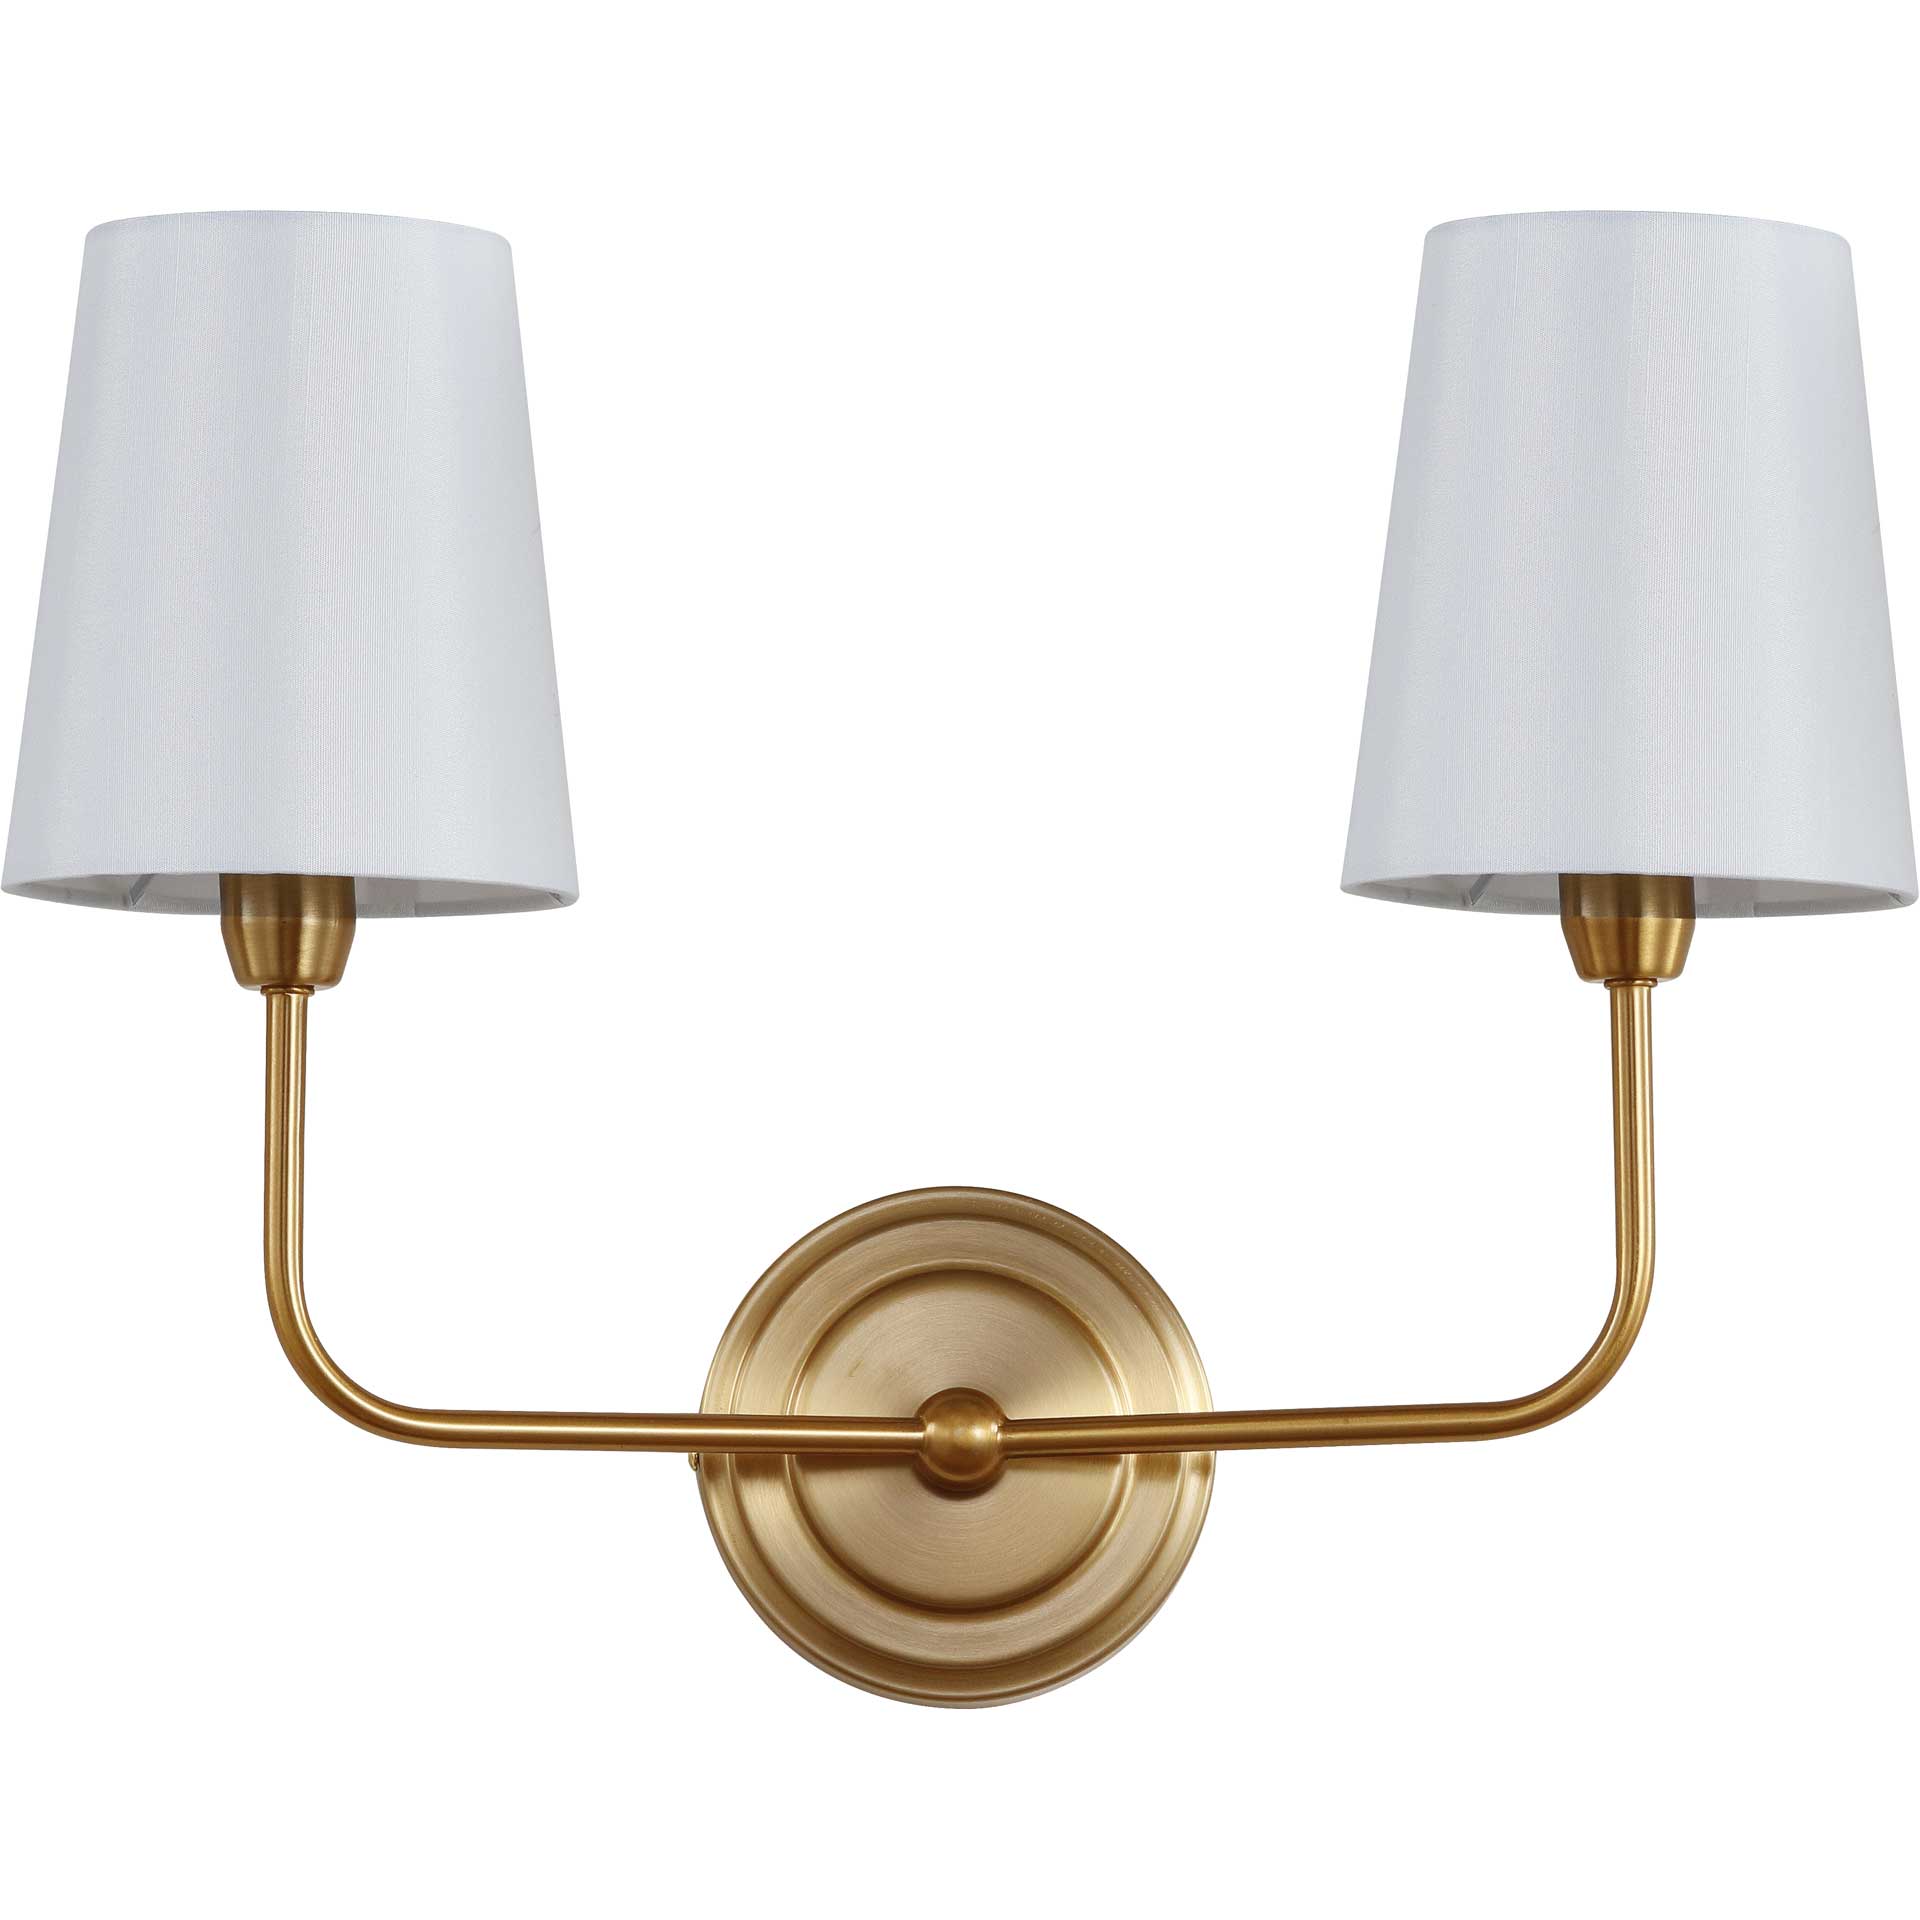 Ezequiel Two Light Wall Sconce Brass Gold